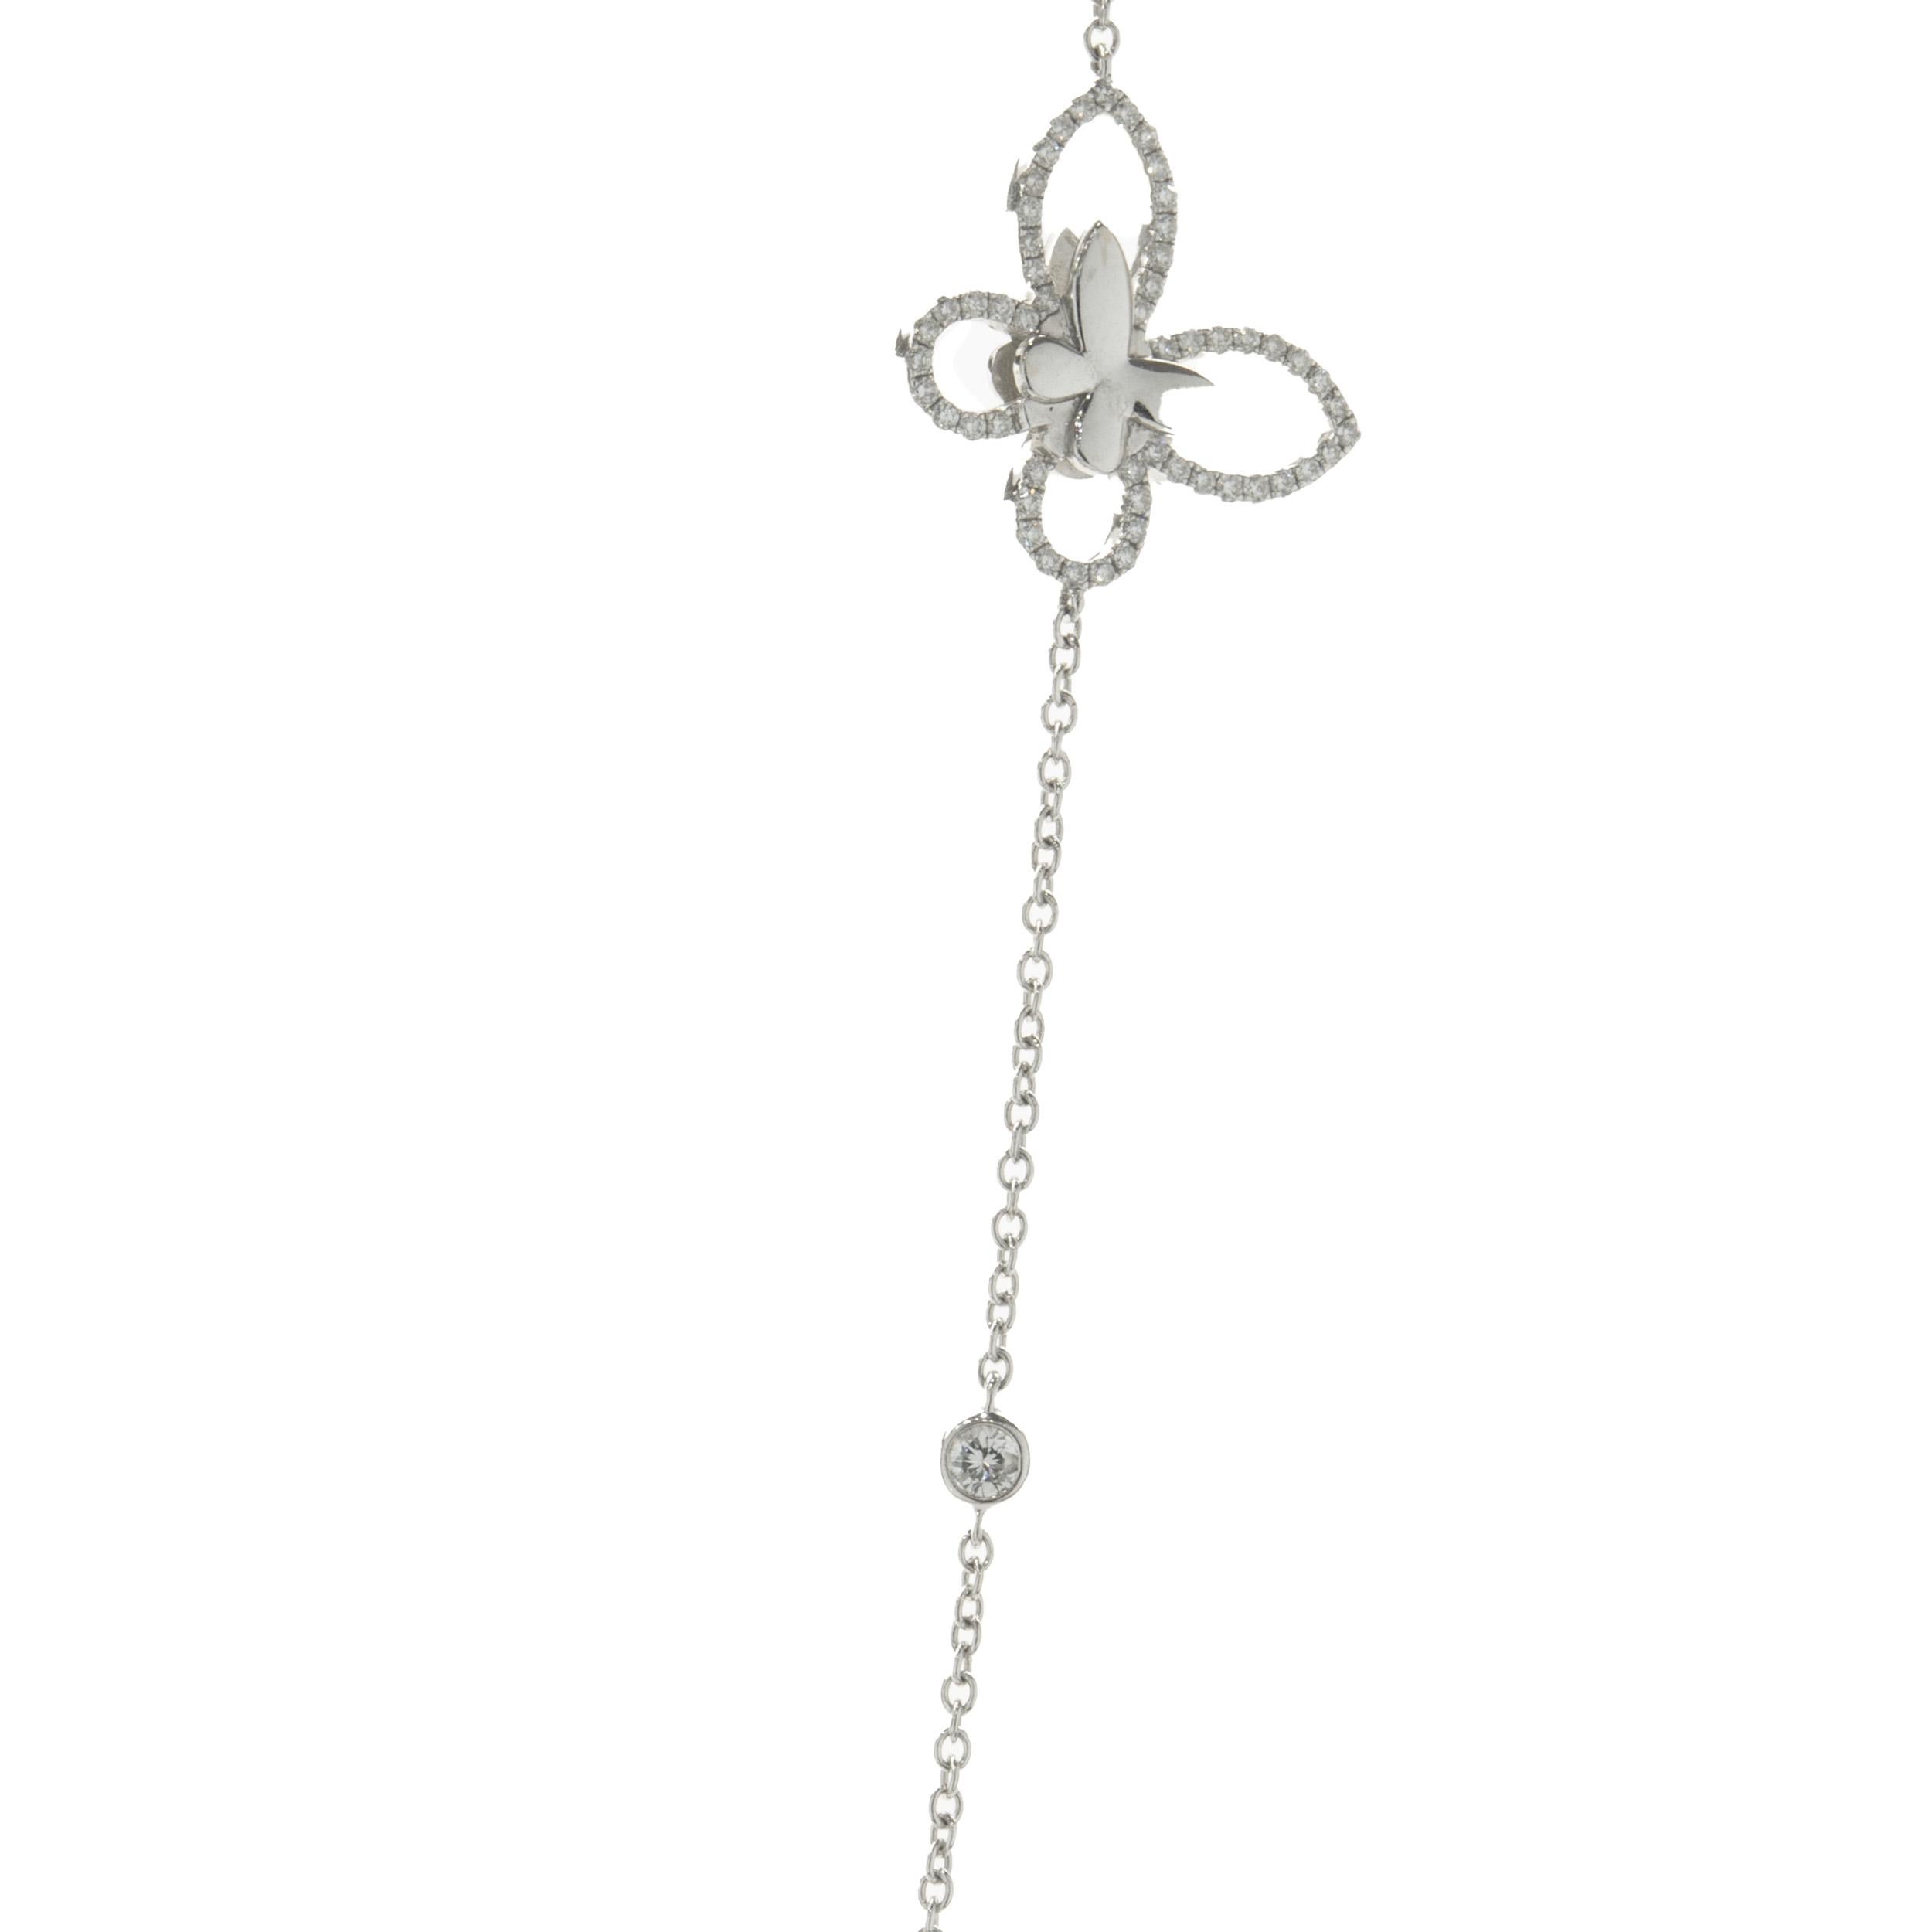 Designer: custom
Material: 18K white gold
Diamonds: round brilliant cut = 4.00cttw 
Color: G
Clarity: VS2 
Weight: 23.05 grams
Dimensions: necklace measures 32-inches long